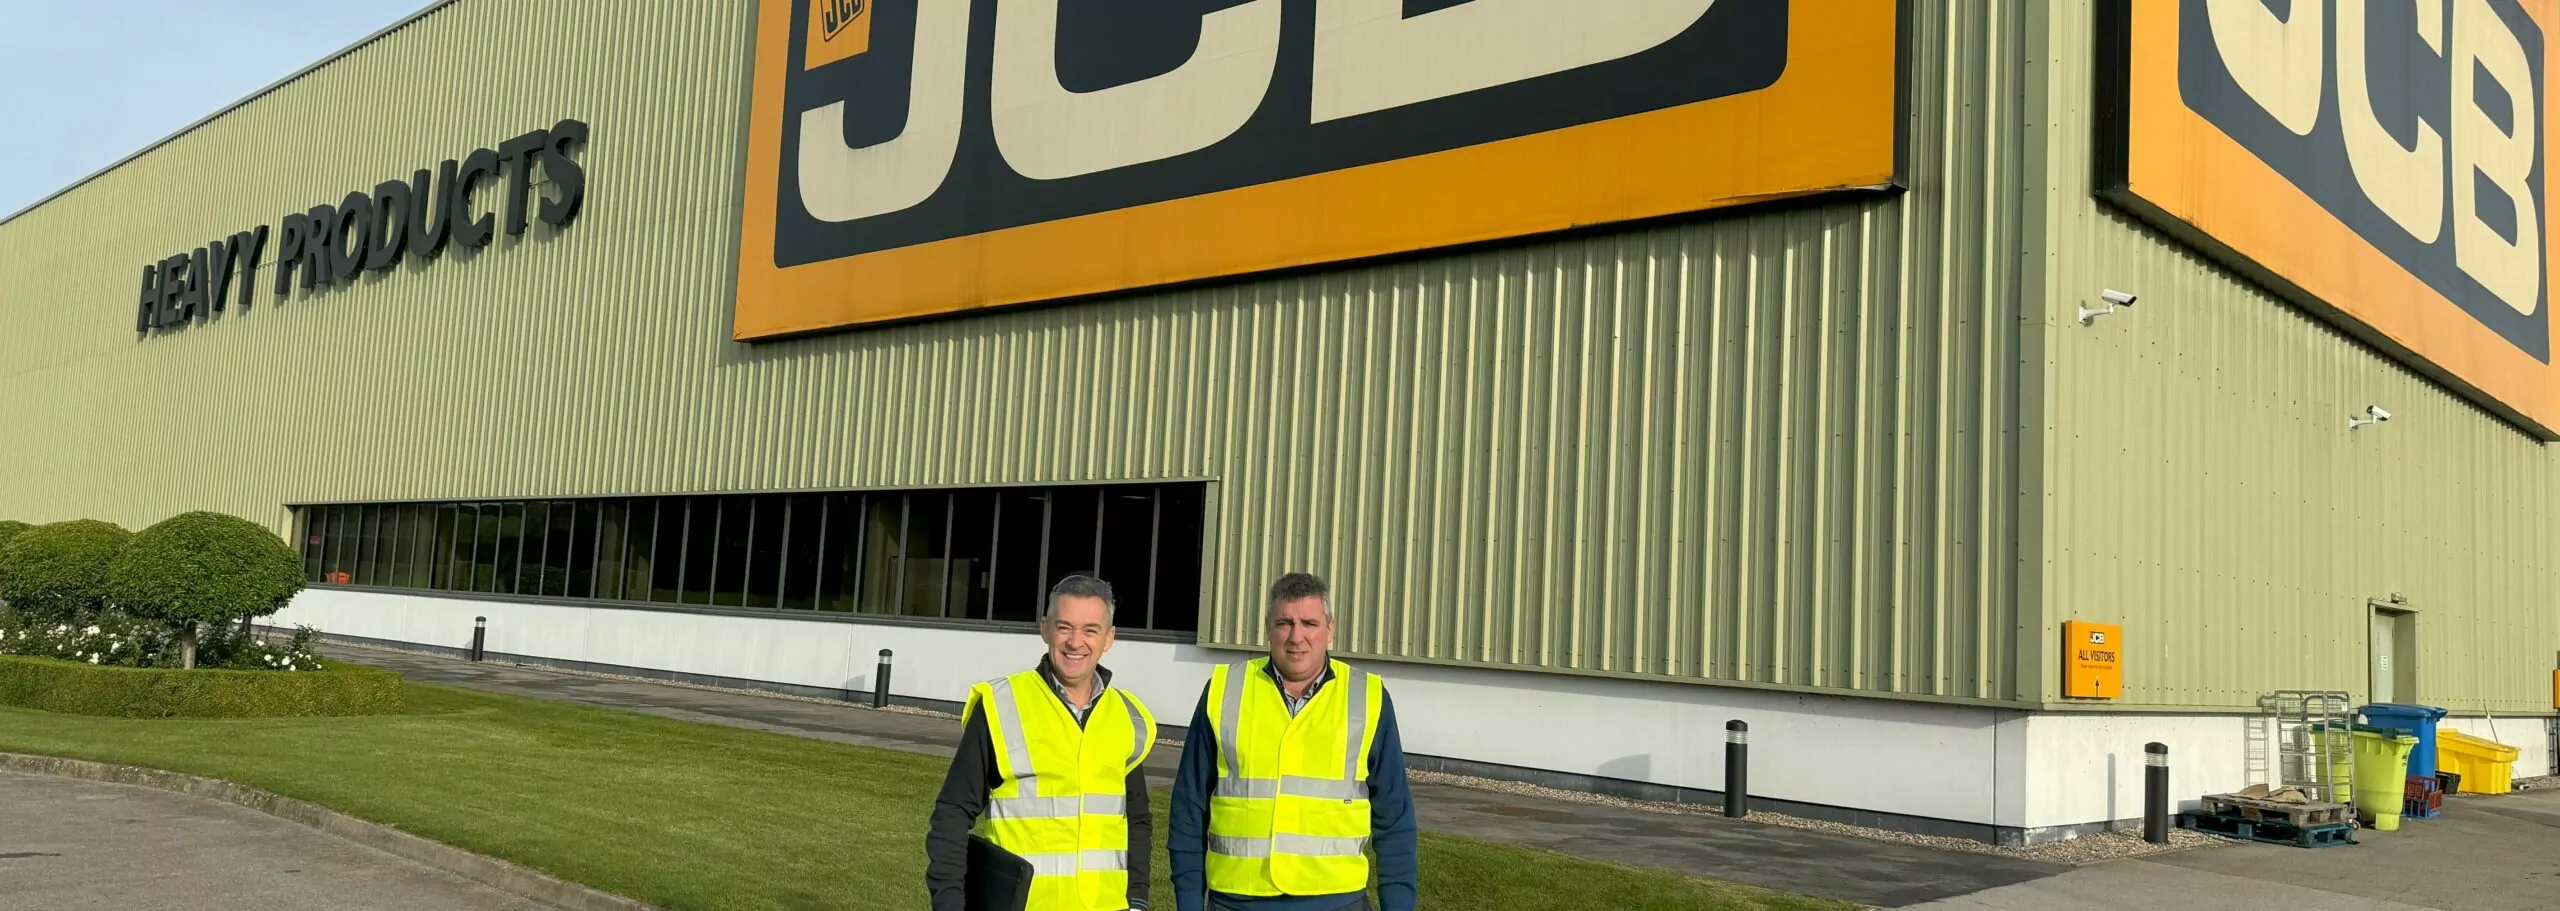 Two men standing in front of a jcb products building.